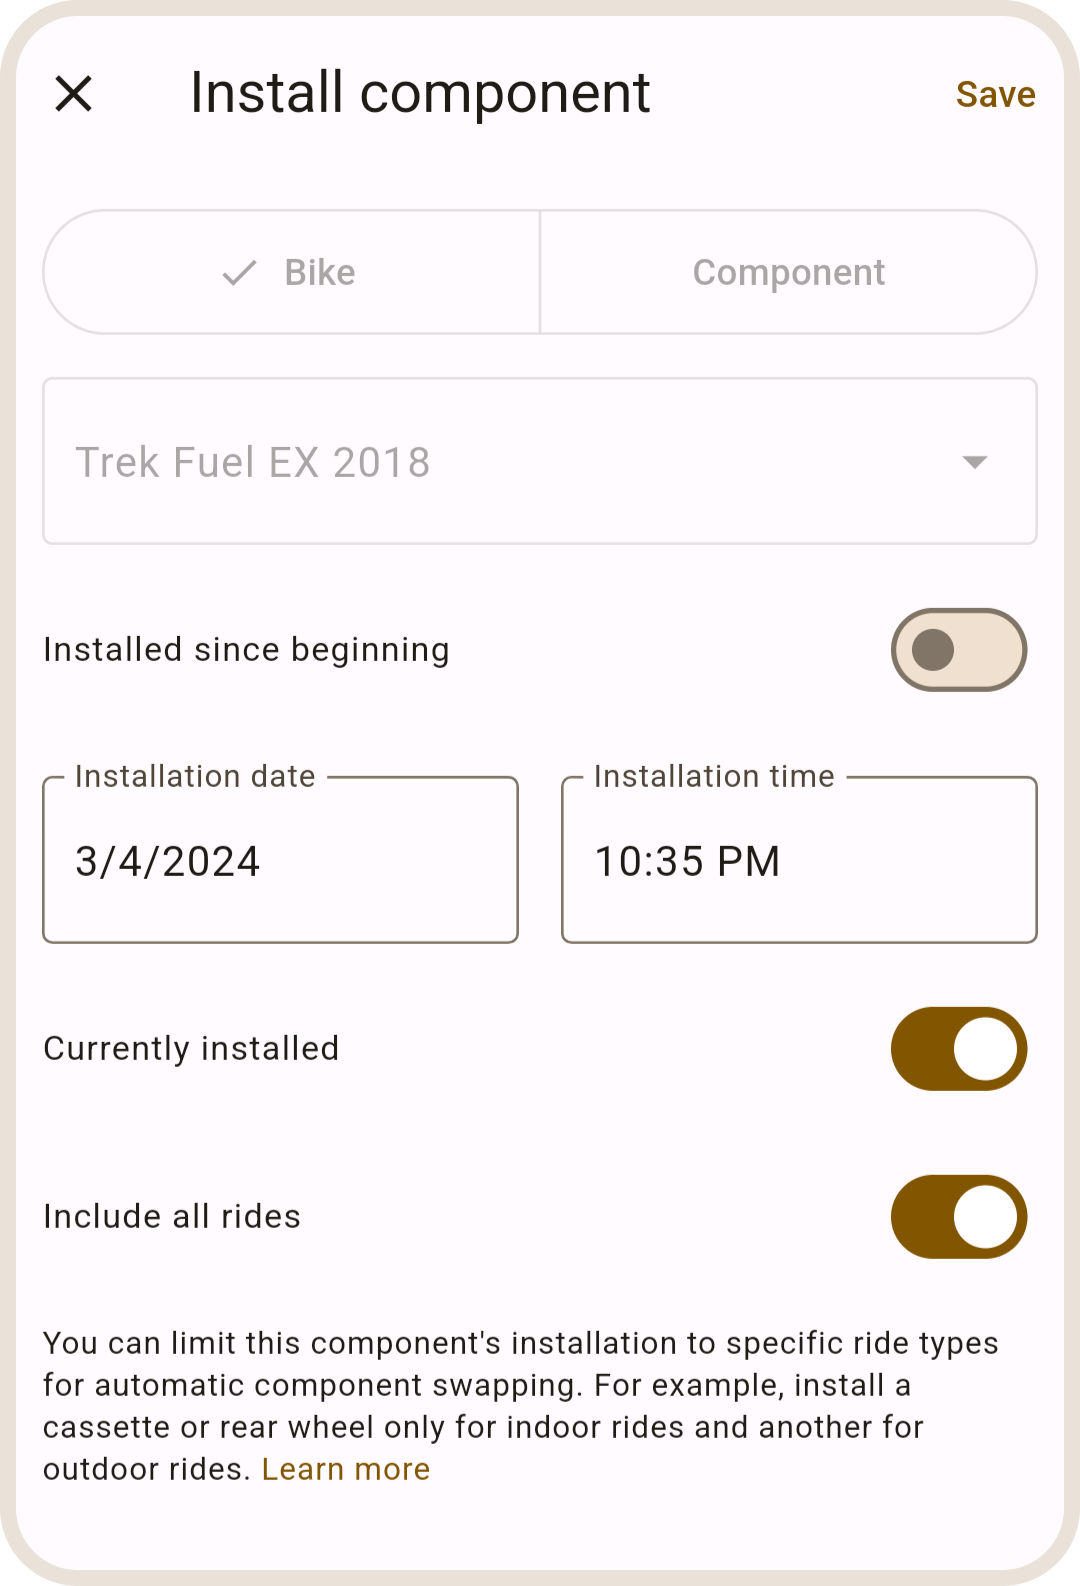 Install component form in ProBikeGarage app